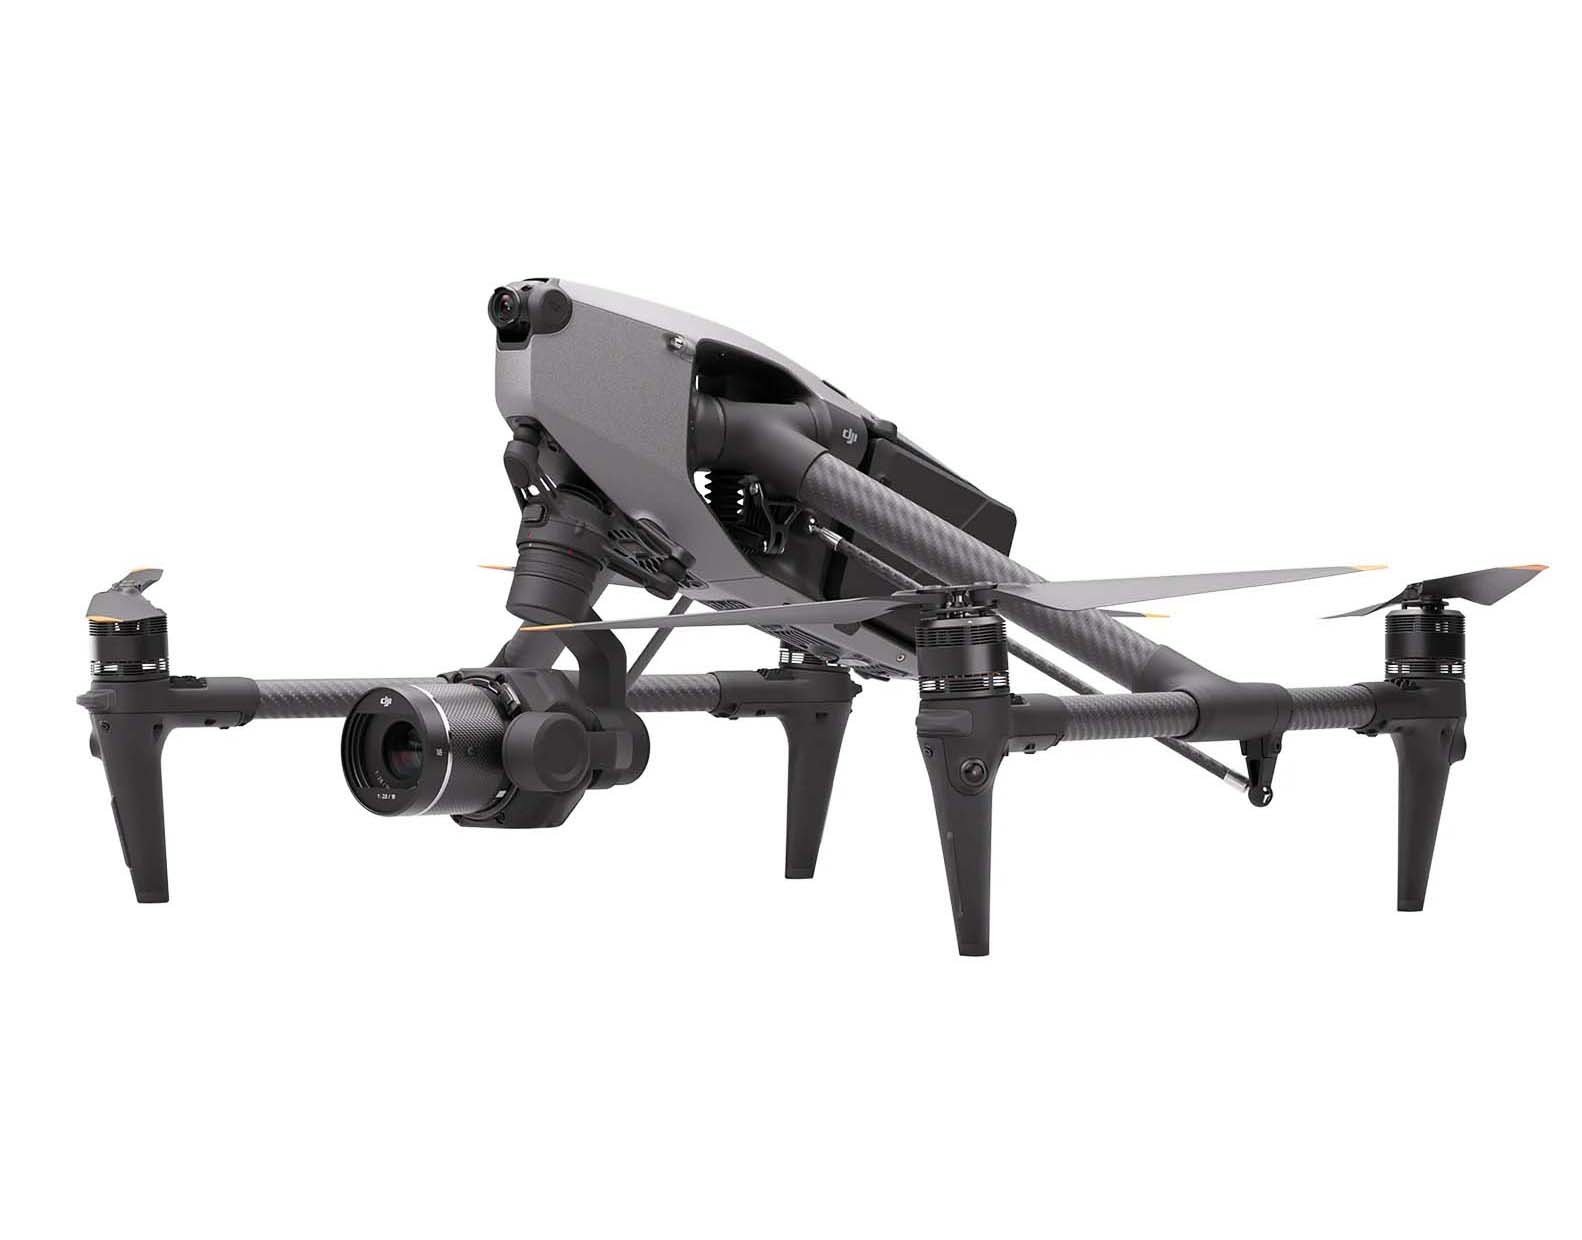 Image of the DJI Inspire 3, the latest professional drone renowned for its stability and stunning aerial imagery, preferred by filmmakers worldwide.